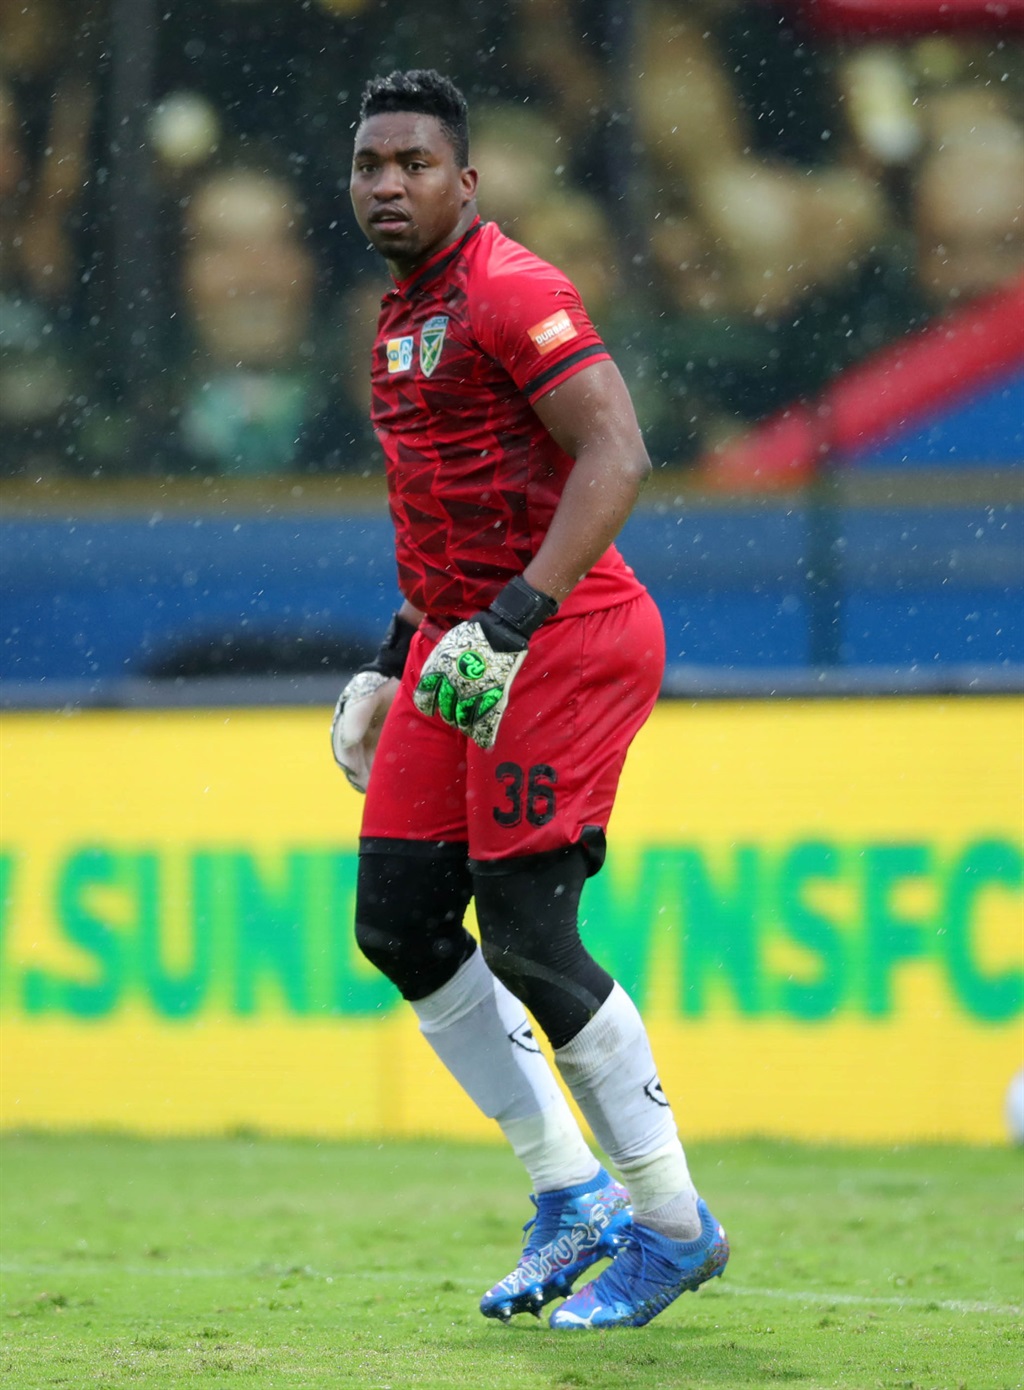 Golden Arrows goalkeeper, Sifiso Mlungwana, says the comments by Bafana Bafana coach didn’t go down well with him.  Photo by BackpagePix